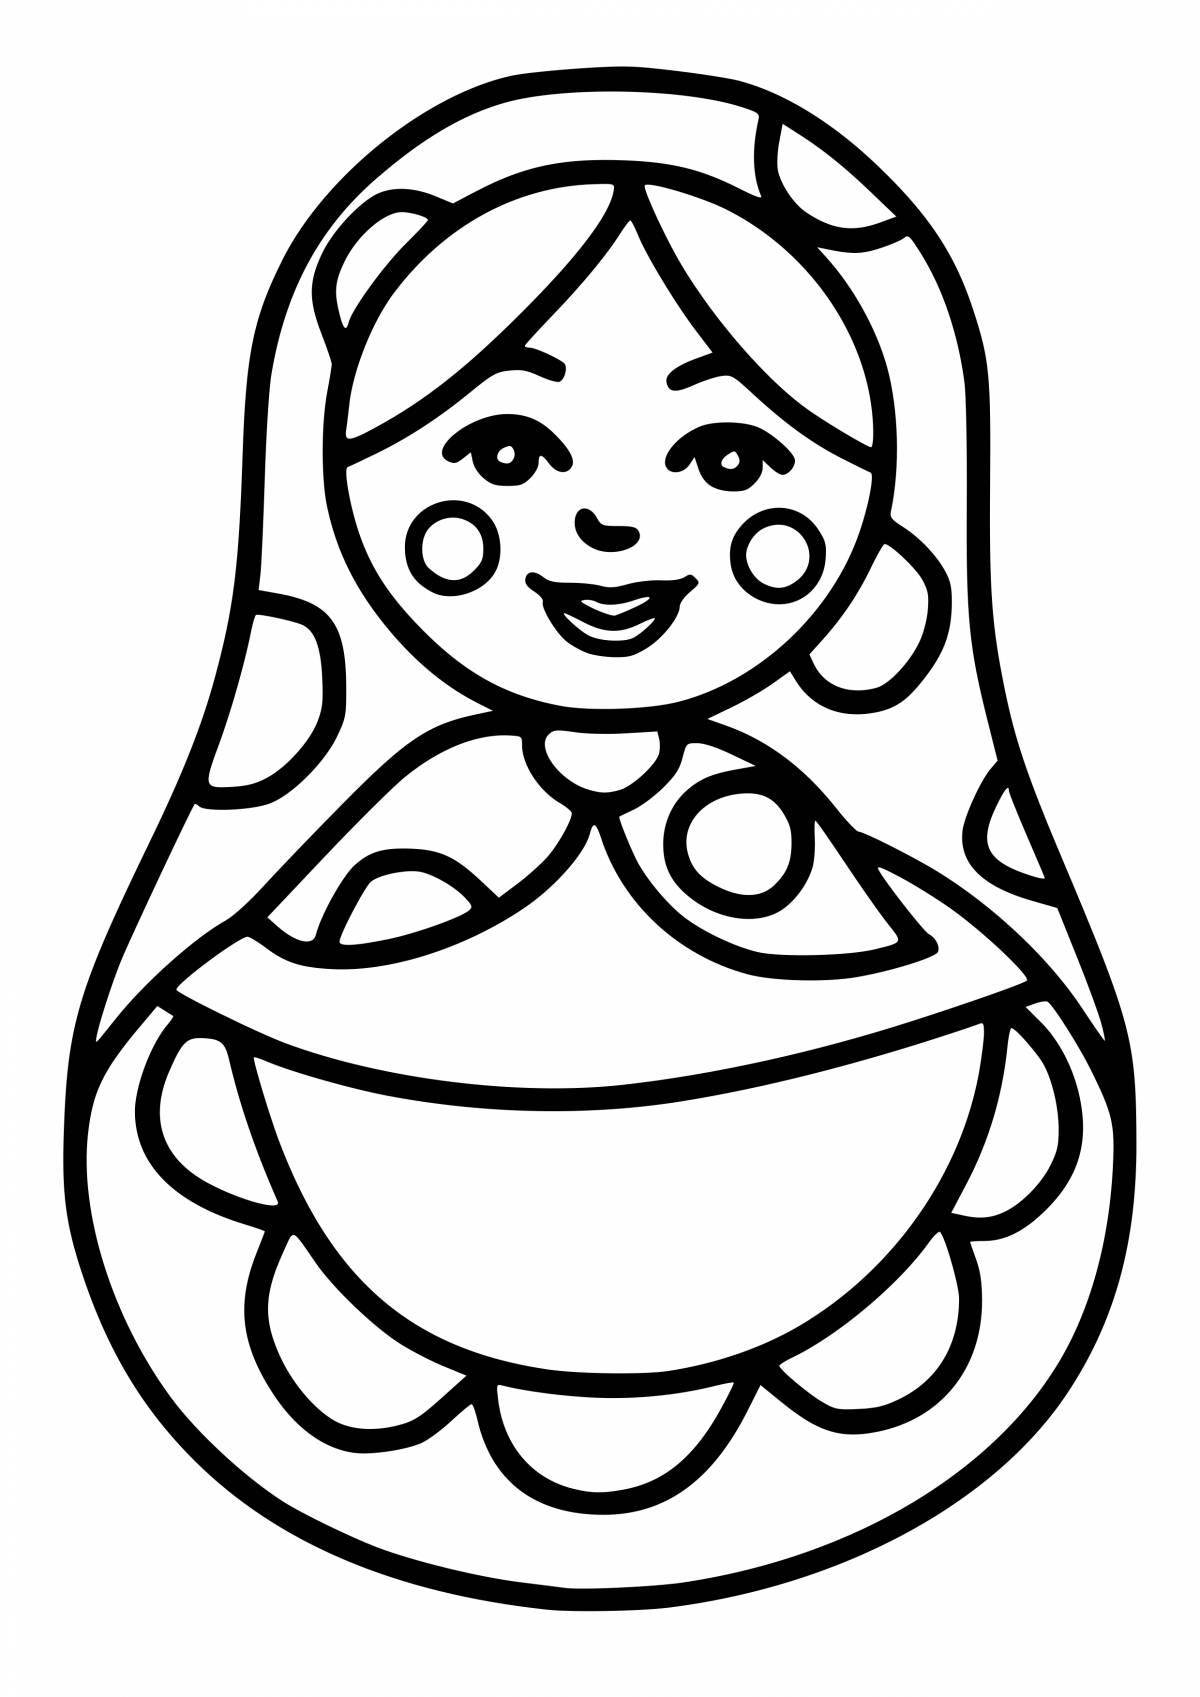 Unique nesting doll coloring template for kids